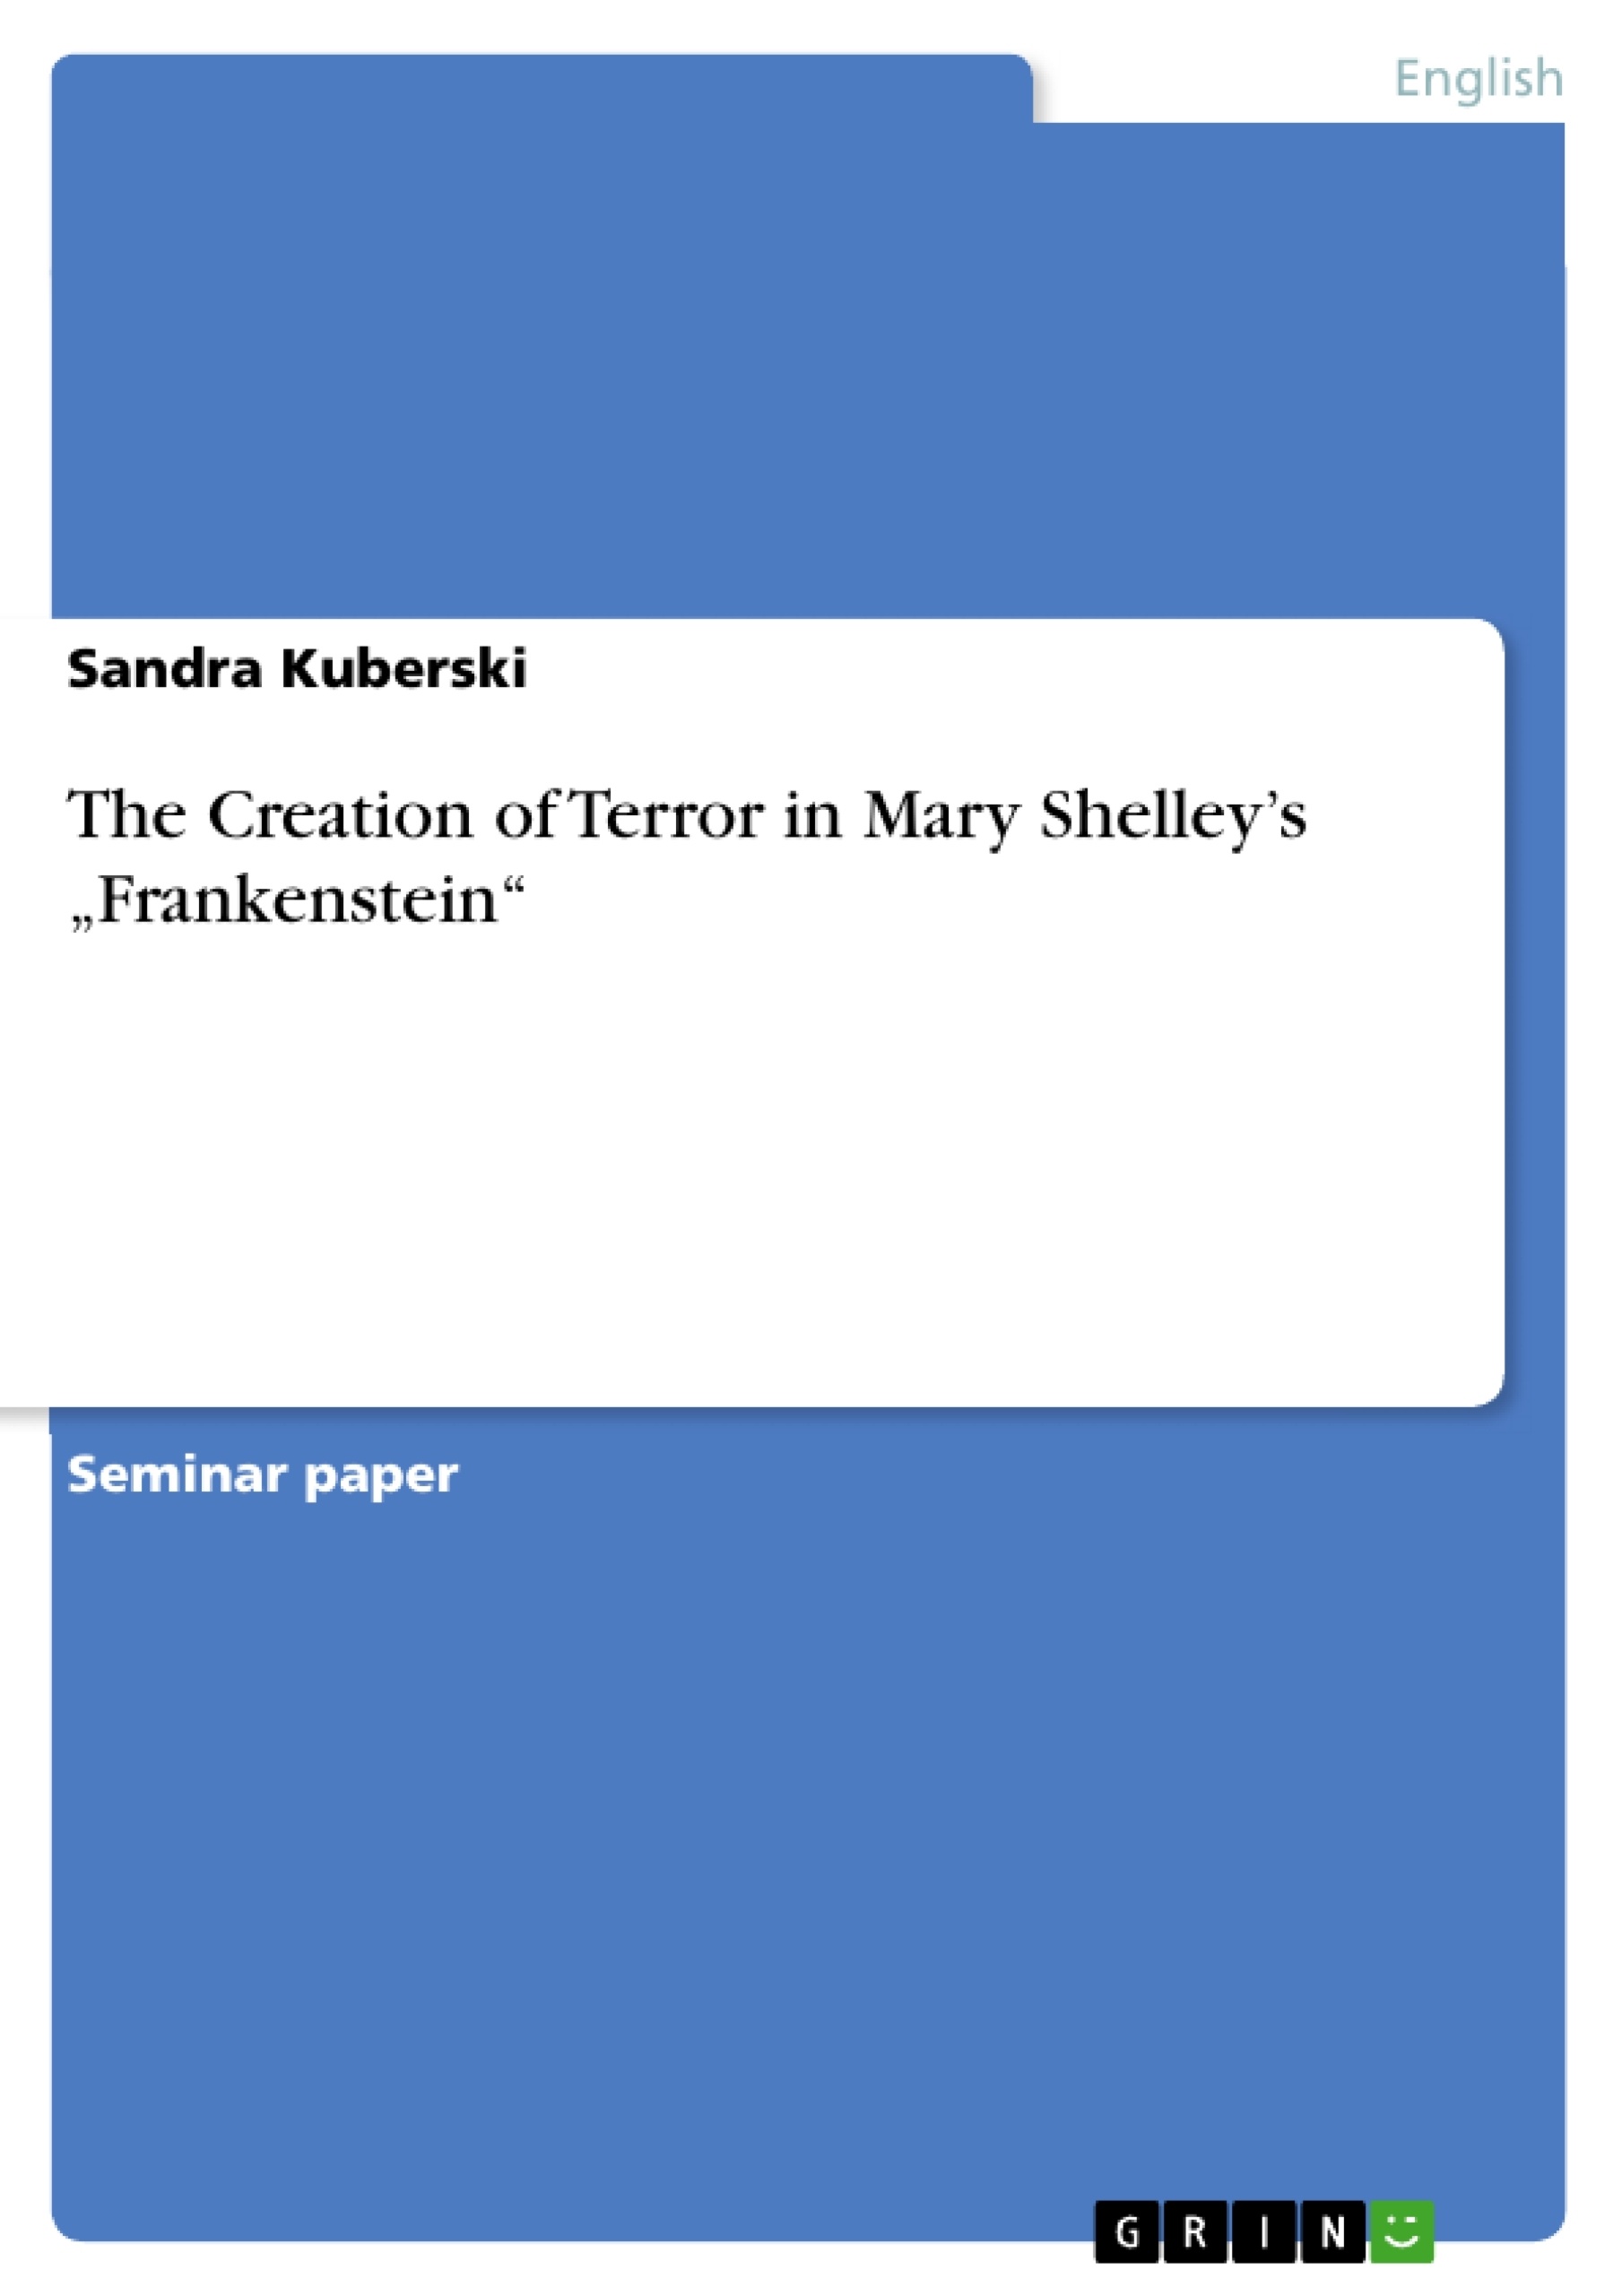 Thesis statements for frankenstein by mary shelley